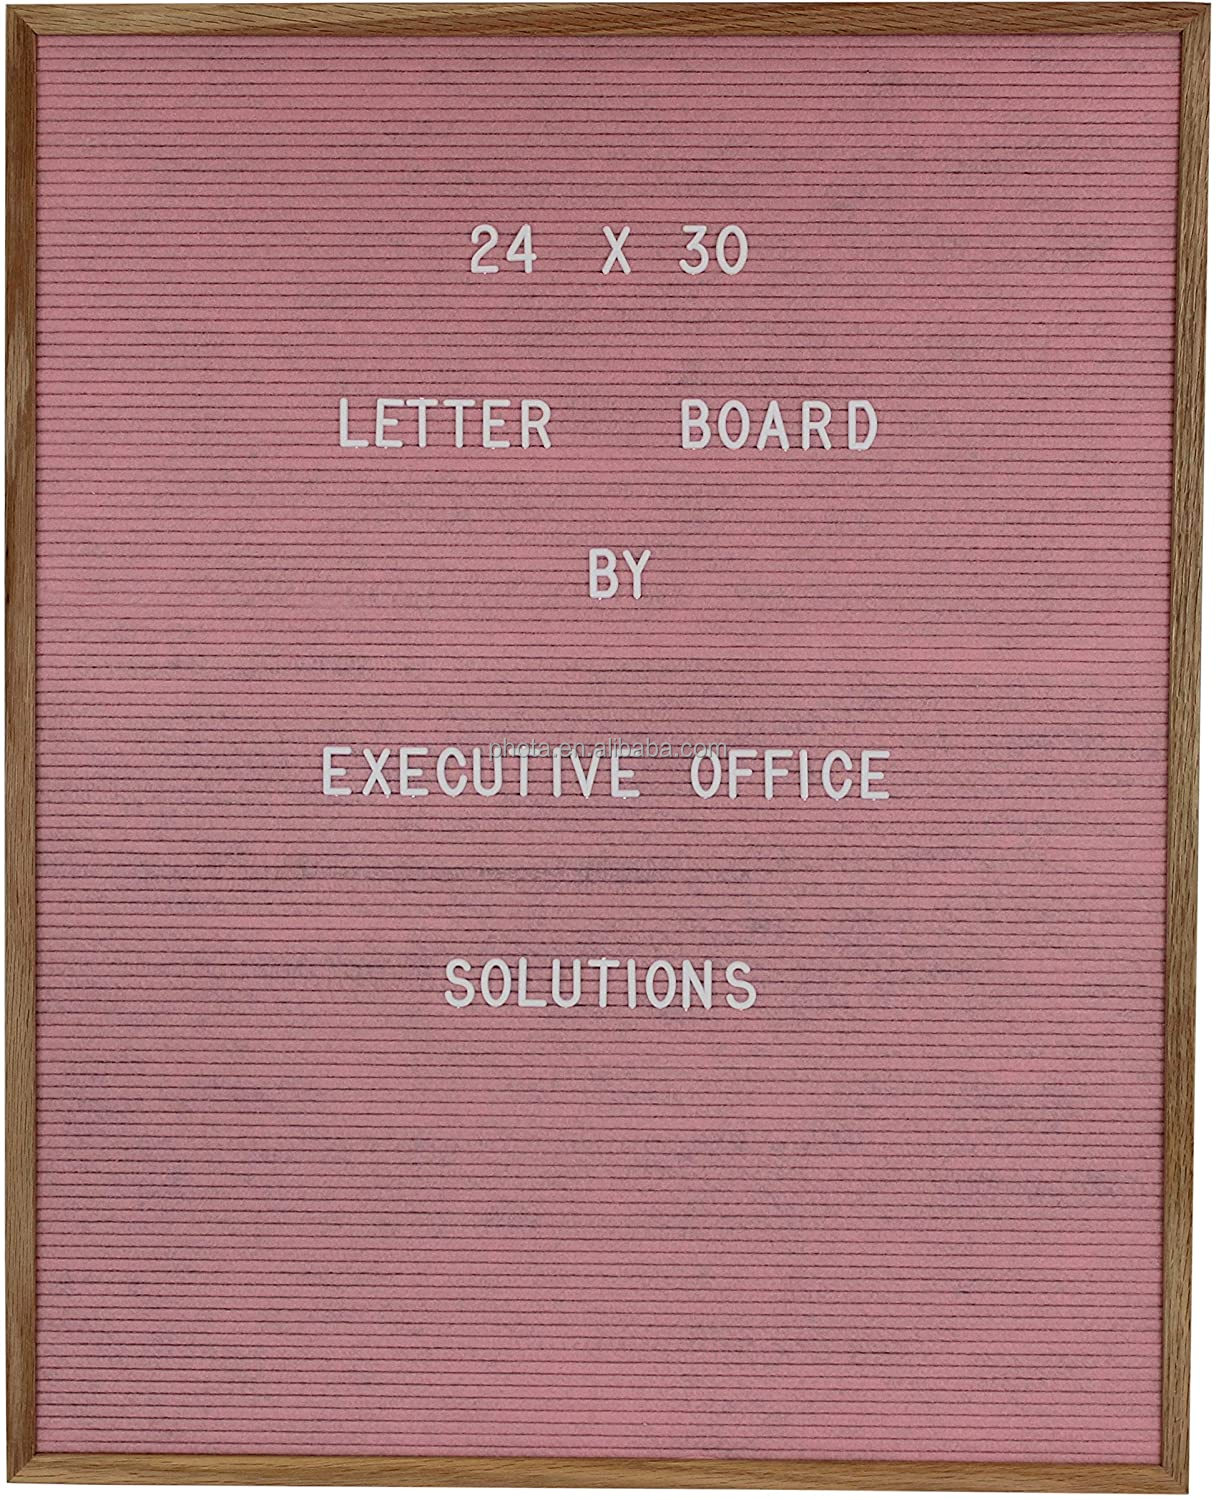 Extra Large Changeable Letter Board - Black Felt with Solid Oak Frame Letter Box and 450 Characters 24 x 30 Pink